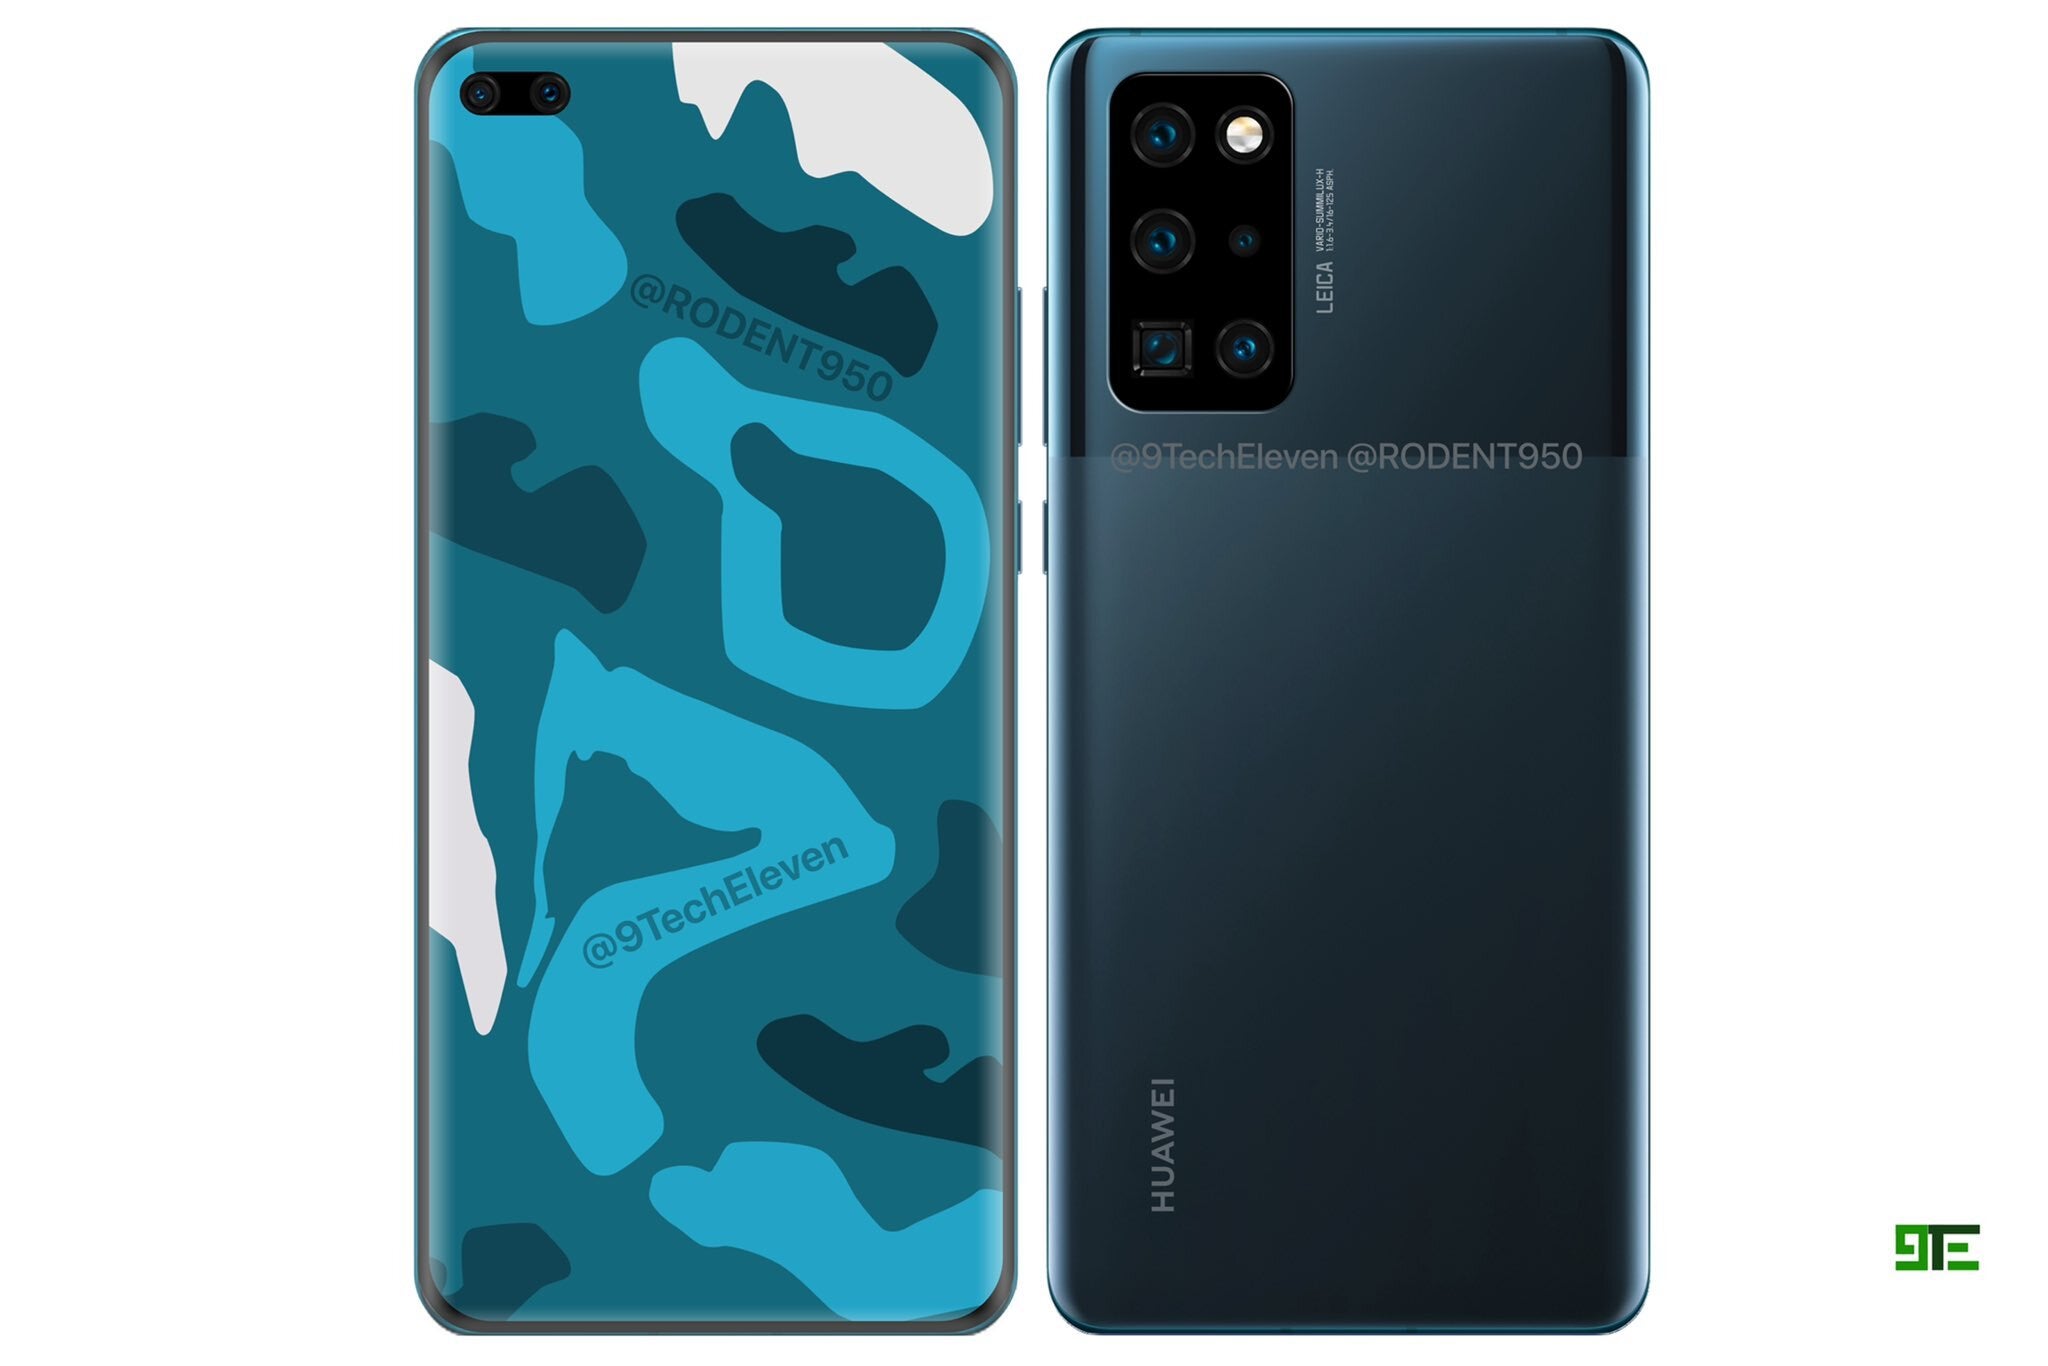 Huawei P40 Pro concept render - Huawei P40 leaks out with punch-hole display, triple-camera setup